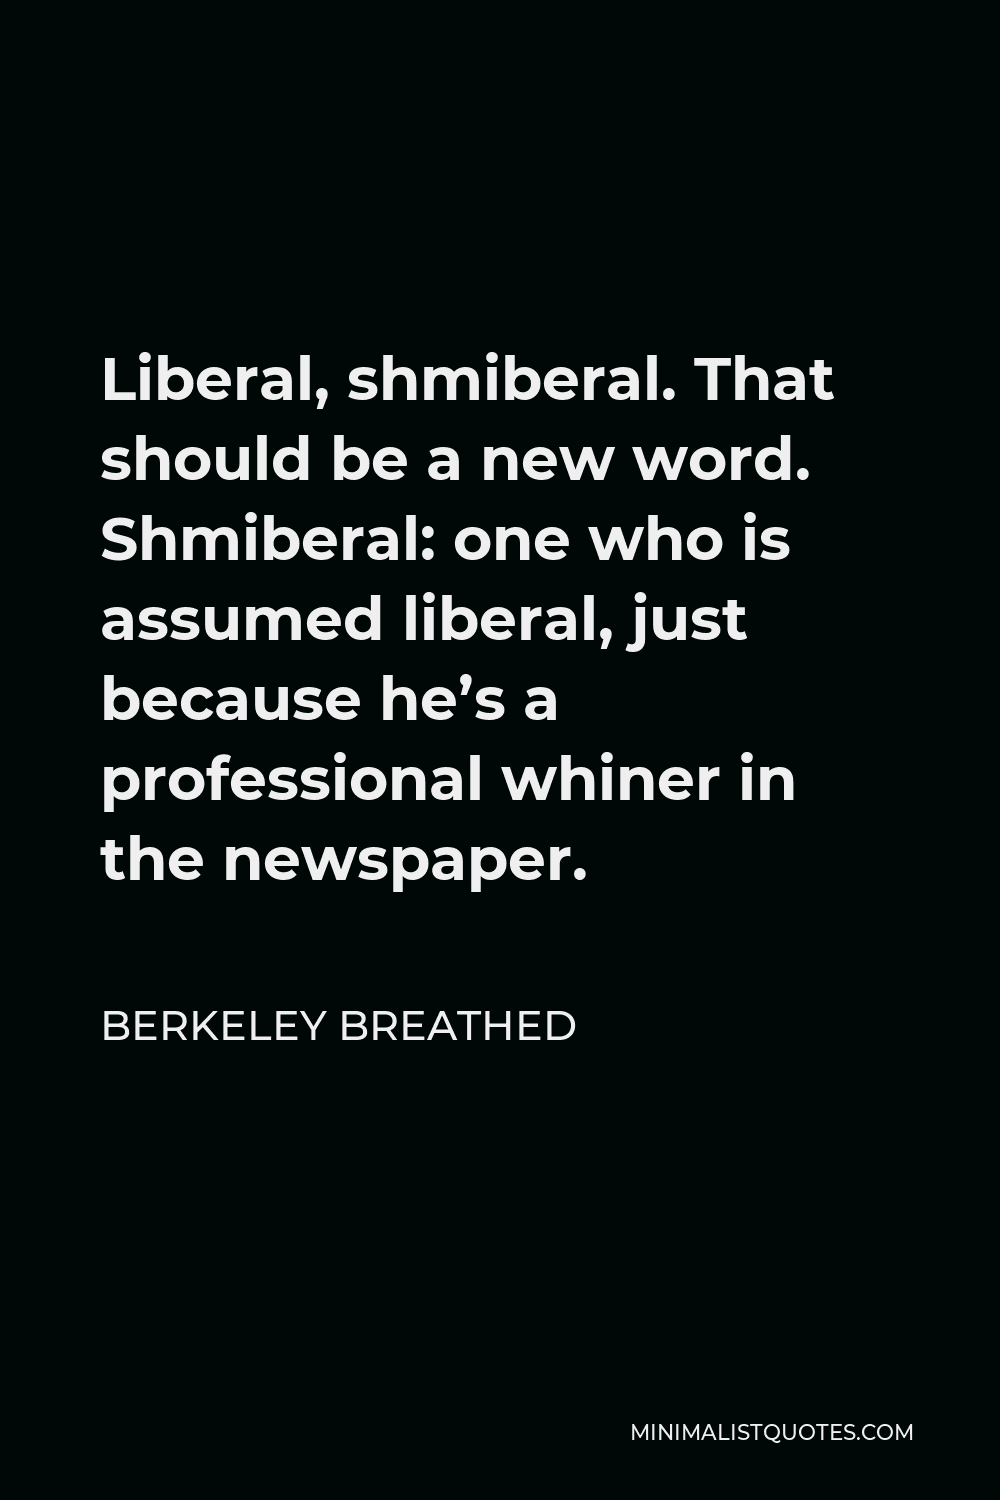 Berkeley Breathed Quote - Liberal, shmiberal. That should be a new word. Shmiberal: one who is assumed liberal, just because he’s a professional whiner in the newspaper.